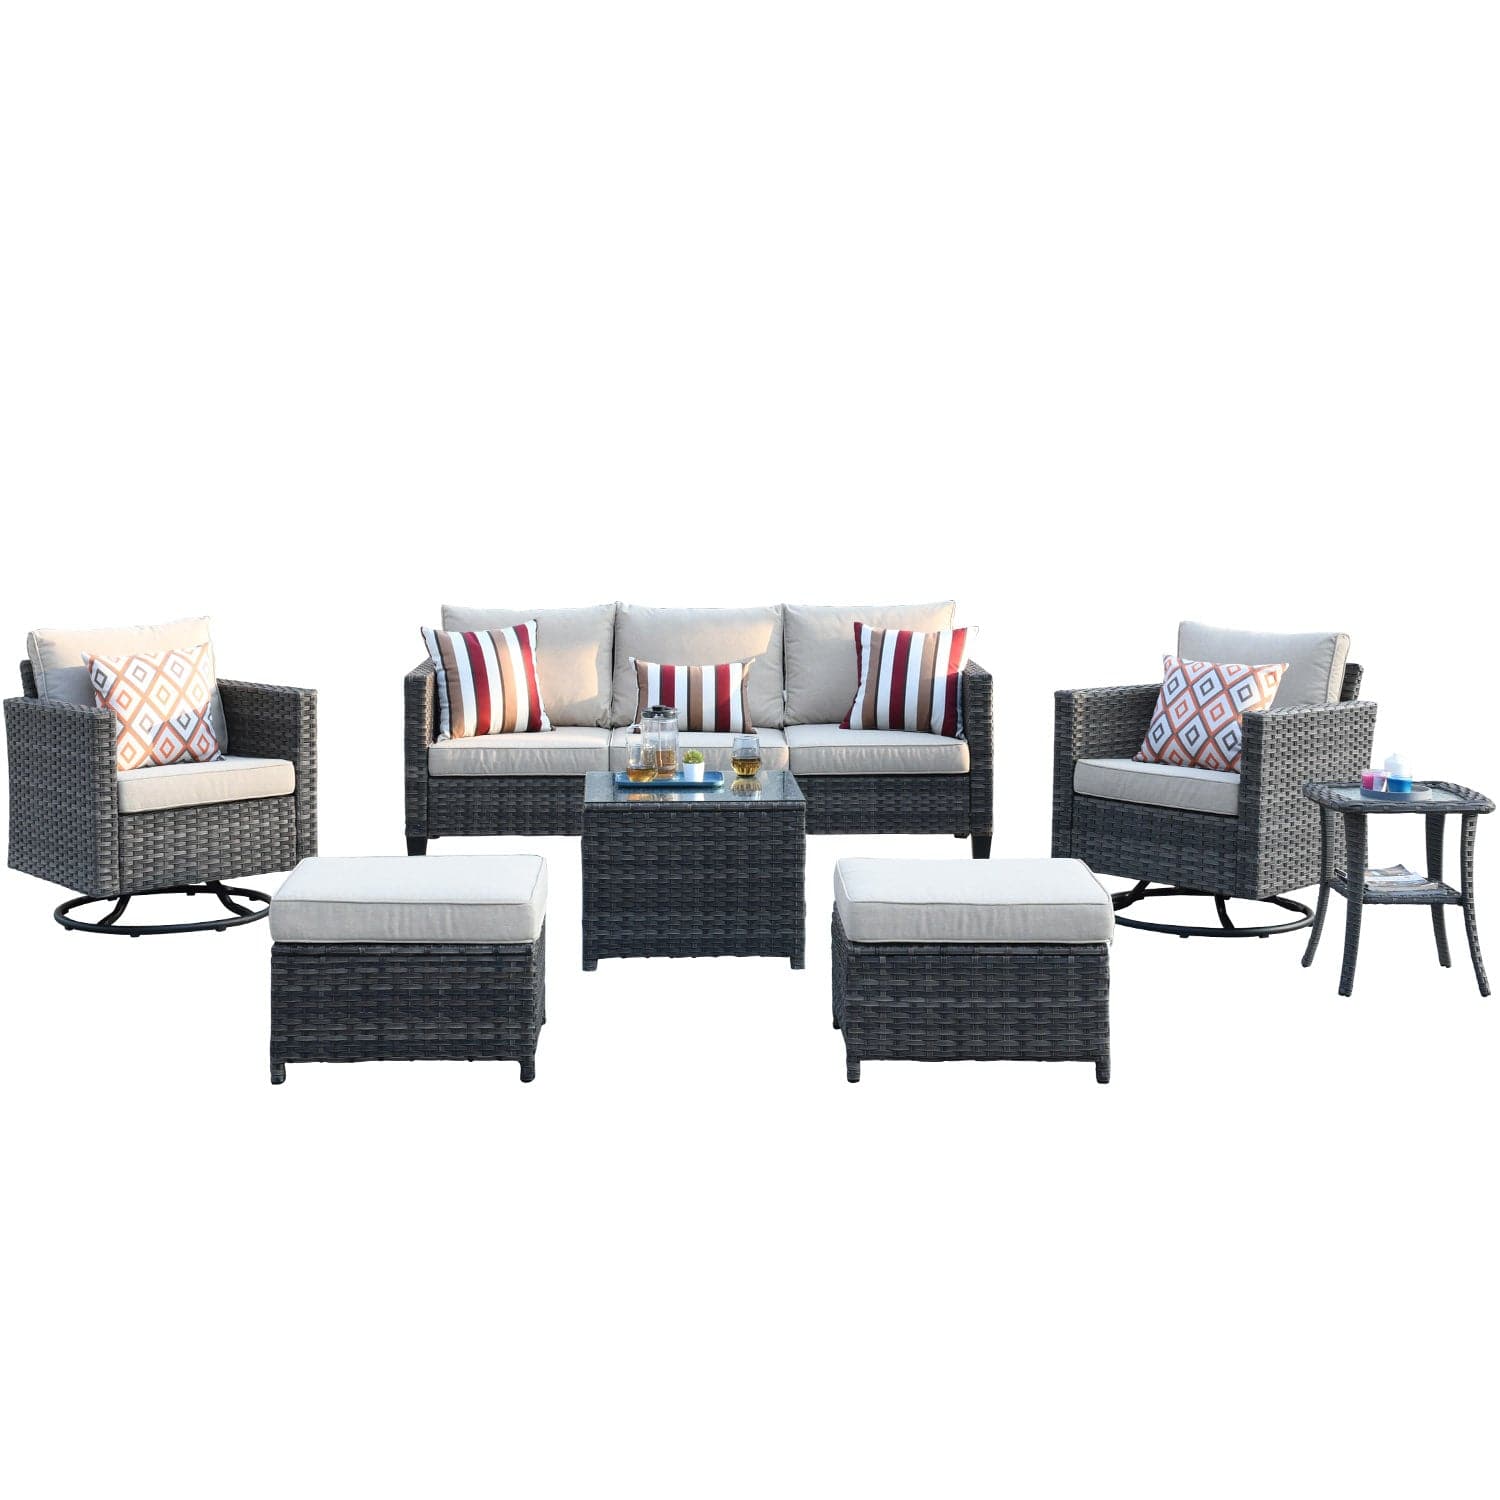 Ovios Patio Conversation Set 7-Piece with Swivel Rocking Chairs and Table